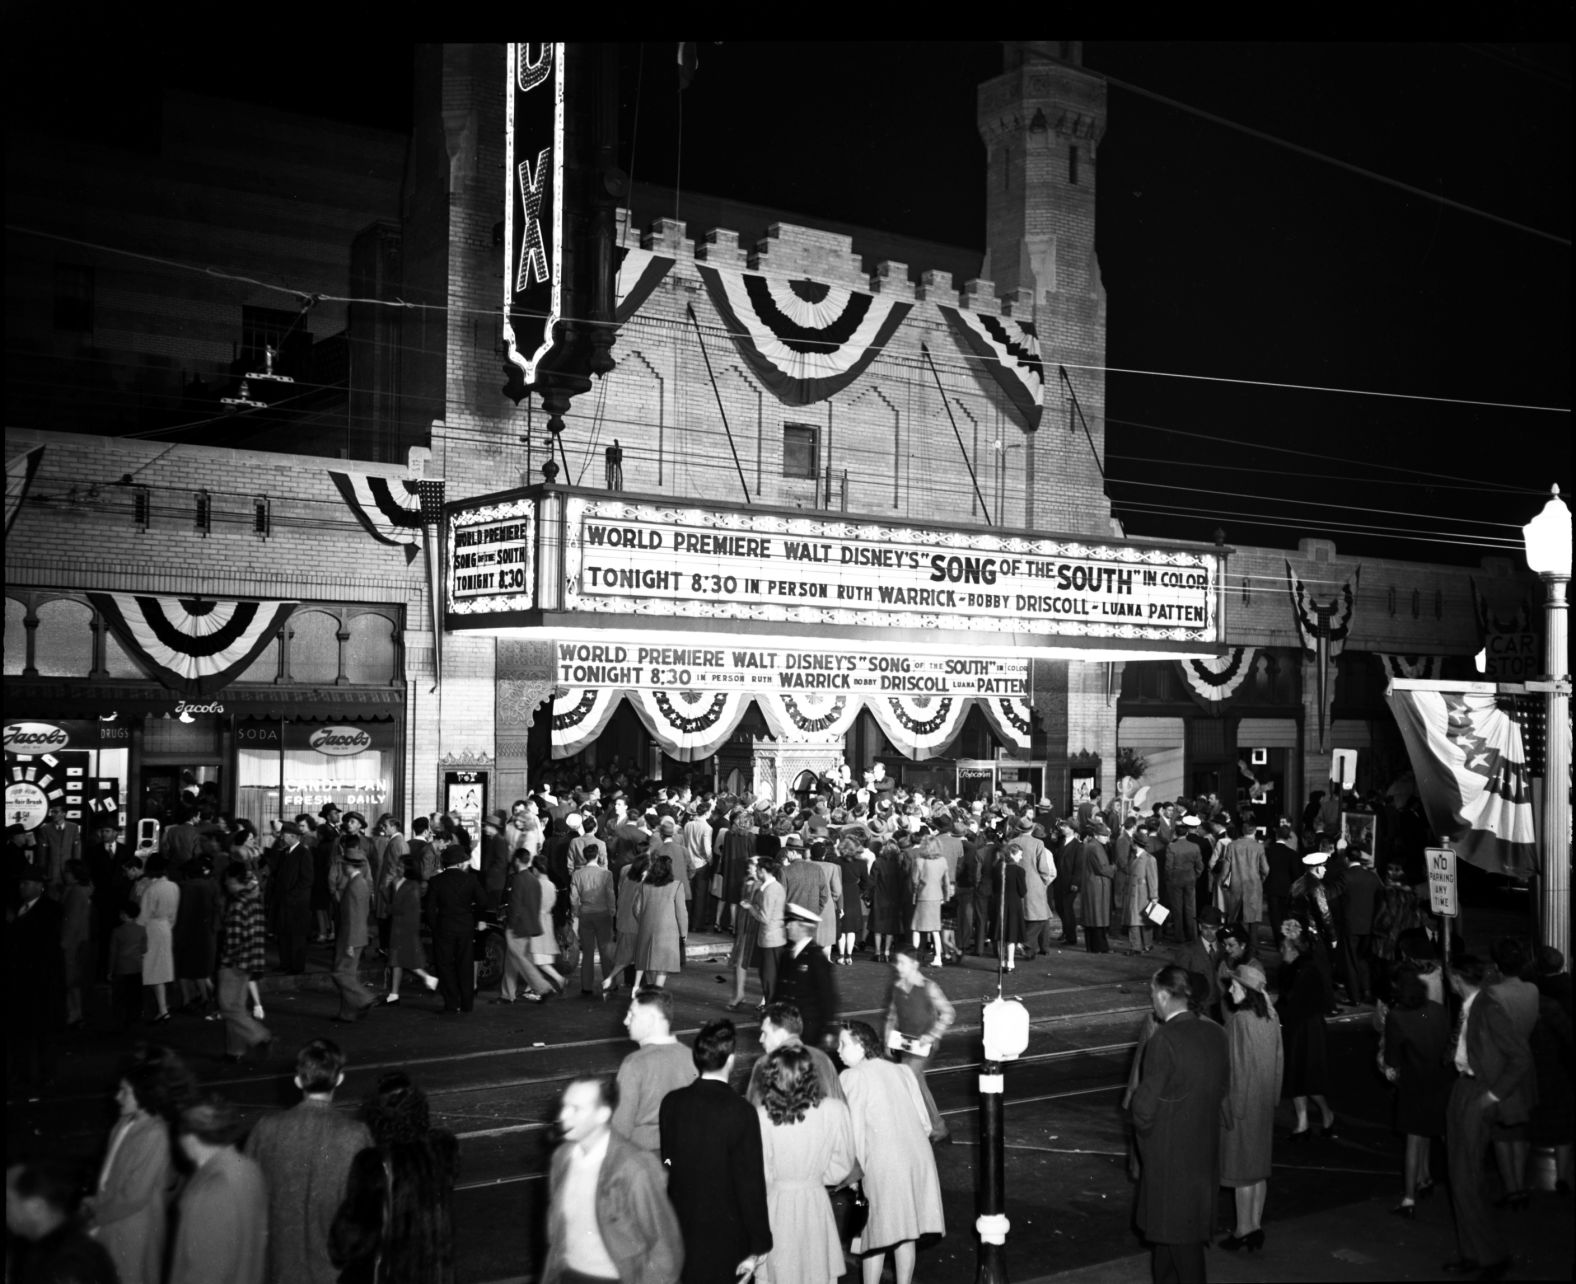 Despite its popularity and beauty, the Fox's grandeur wasn't bullet proof from the Great Depression. And in 1932, only 125 weeks after it opened, William Fox and the theatre were forced to declare bankruptcy, and Fox lost his namesake movie palace. The Fox was auctioned on the courthouse steps and sold to a private company for just $75,000. For the next three decades, the Fox still remained in high demand, showing hundreds of acclaimed films, and evolved into a favorite big band and swing music dance hall. Shown here, moviegoers arrive to watch the premier of Walt Disney's  "Song of the South" in 1946. 